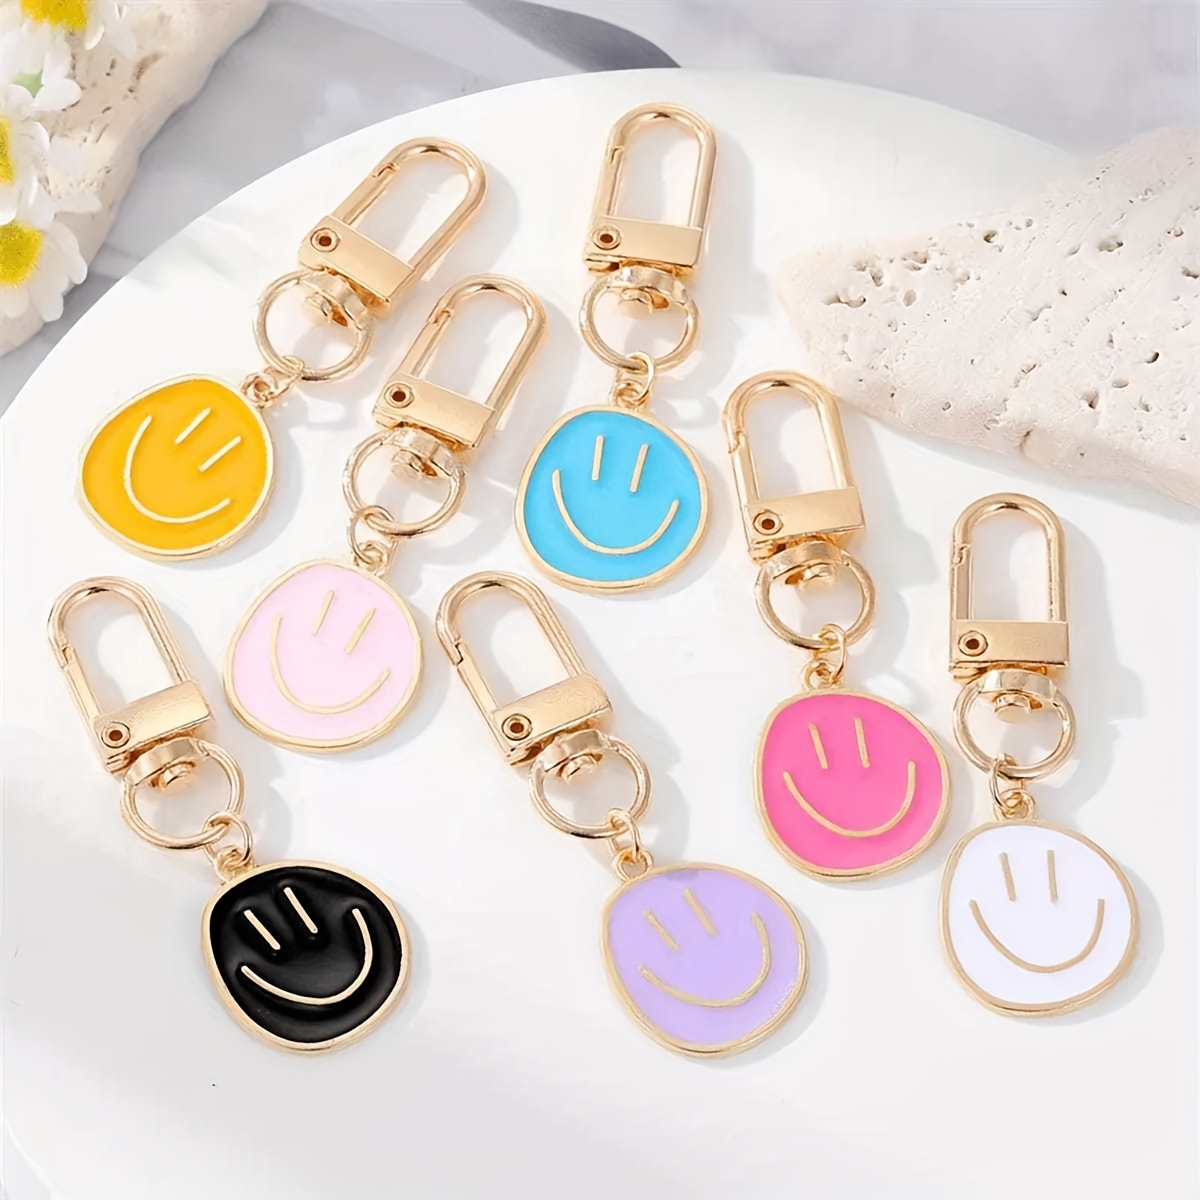 

7pcs Cute Smile Face Keychain Candy Color Alloy Key Chain Ring Bag Backpack Charm Earbud Case Accessories Women Daily Uses Gift